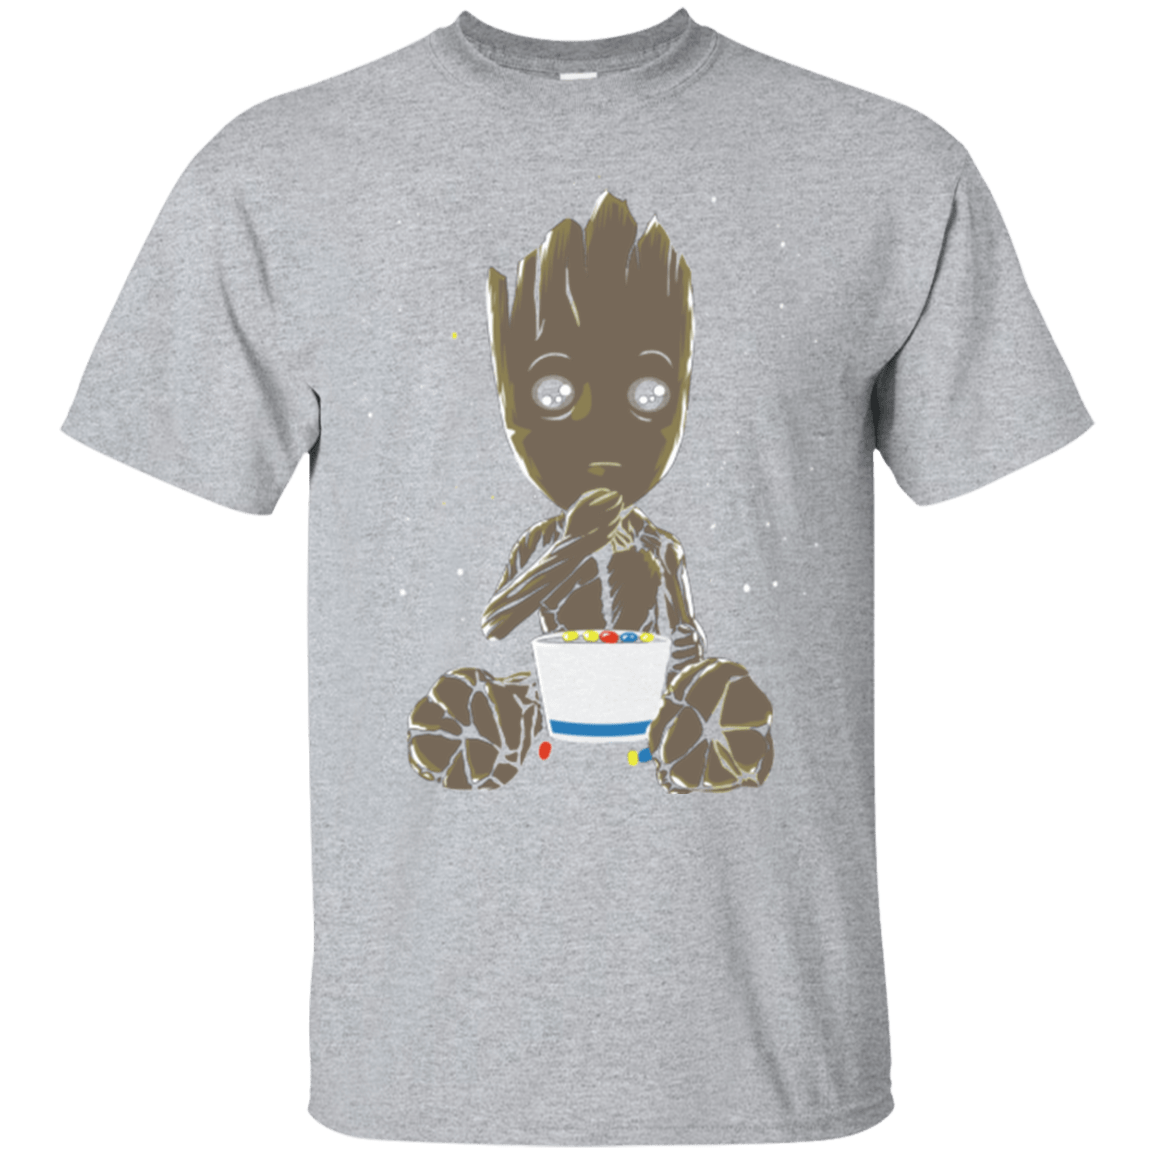 T-Shirts Sport Grey / Small Eating Candies T-Shirt